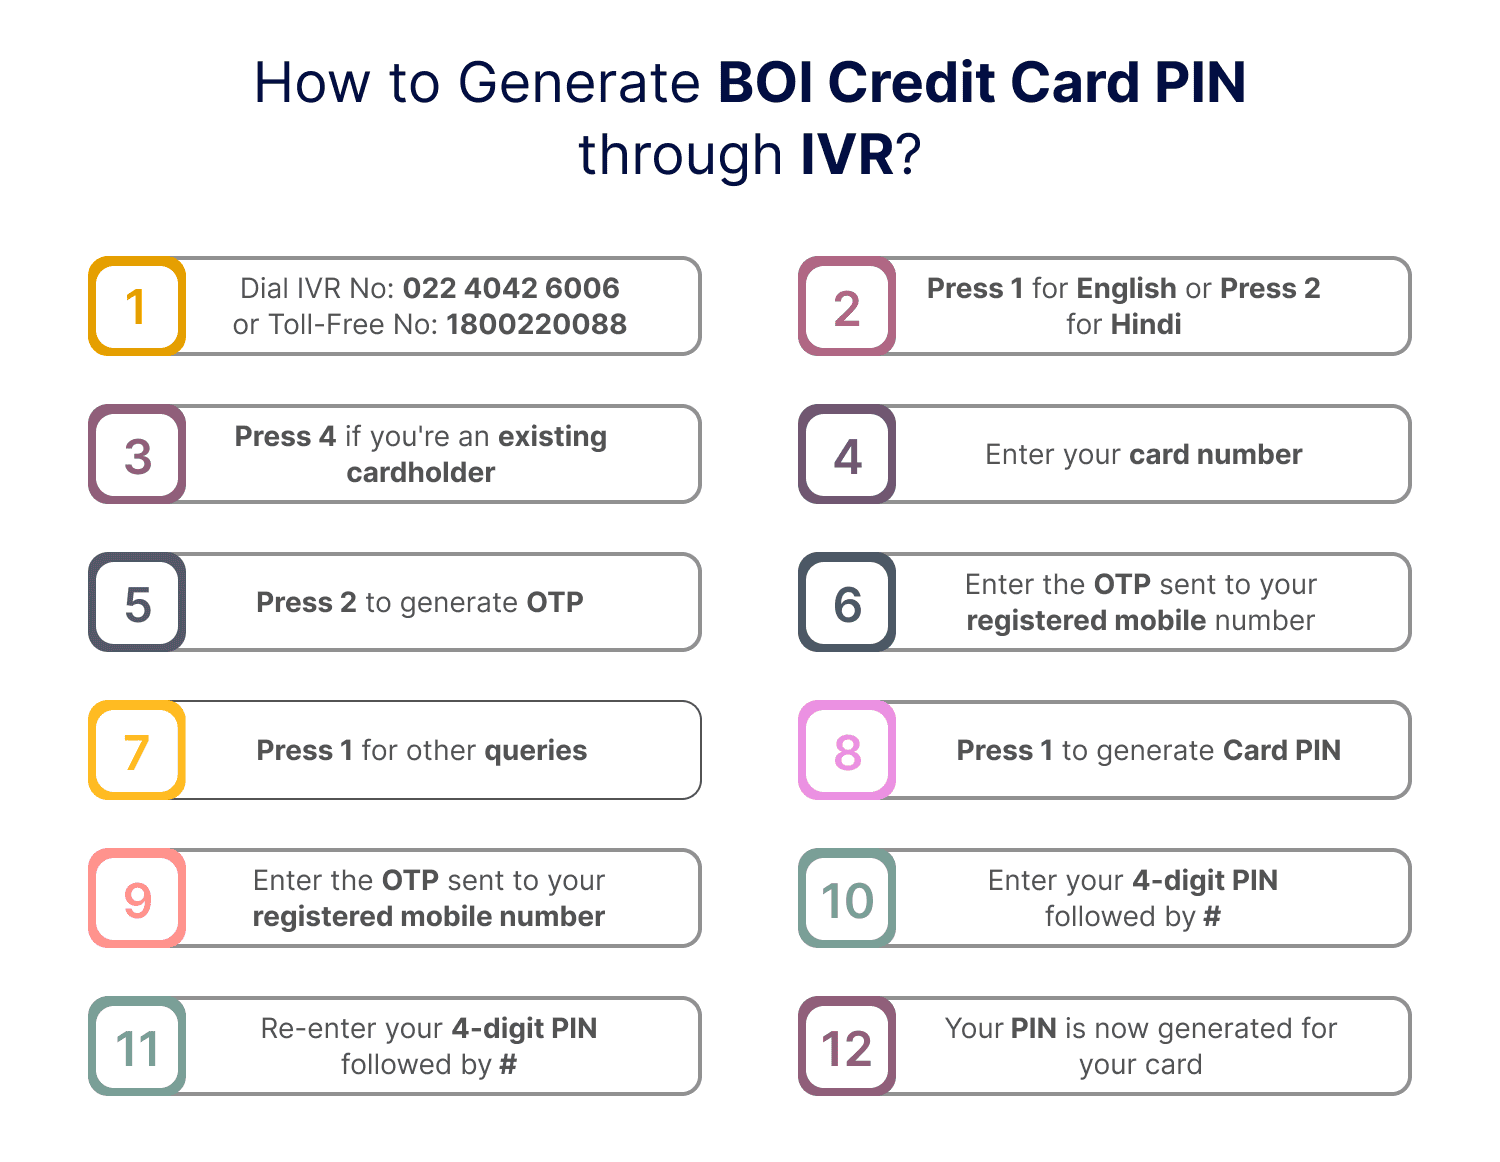 How to Generate BOI Credit Card PIN through IVR